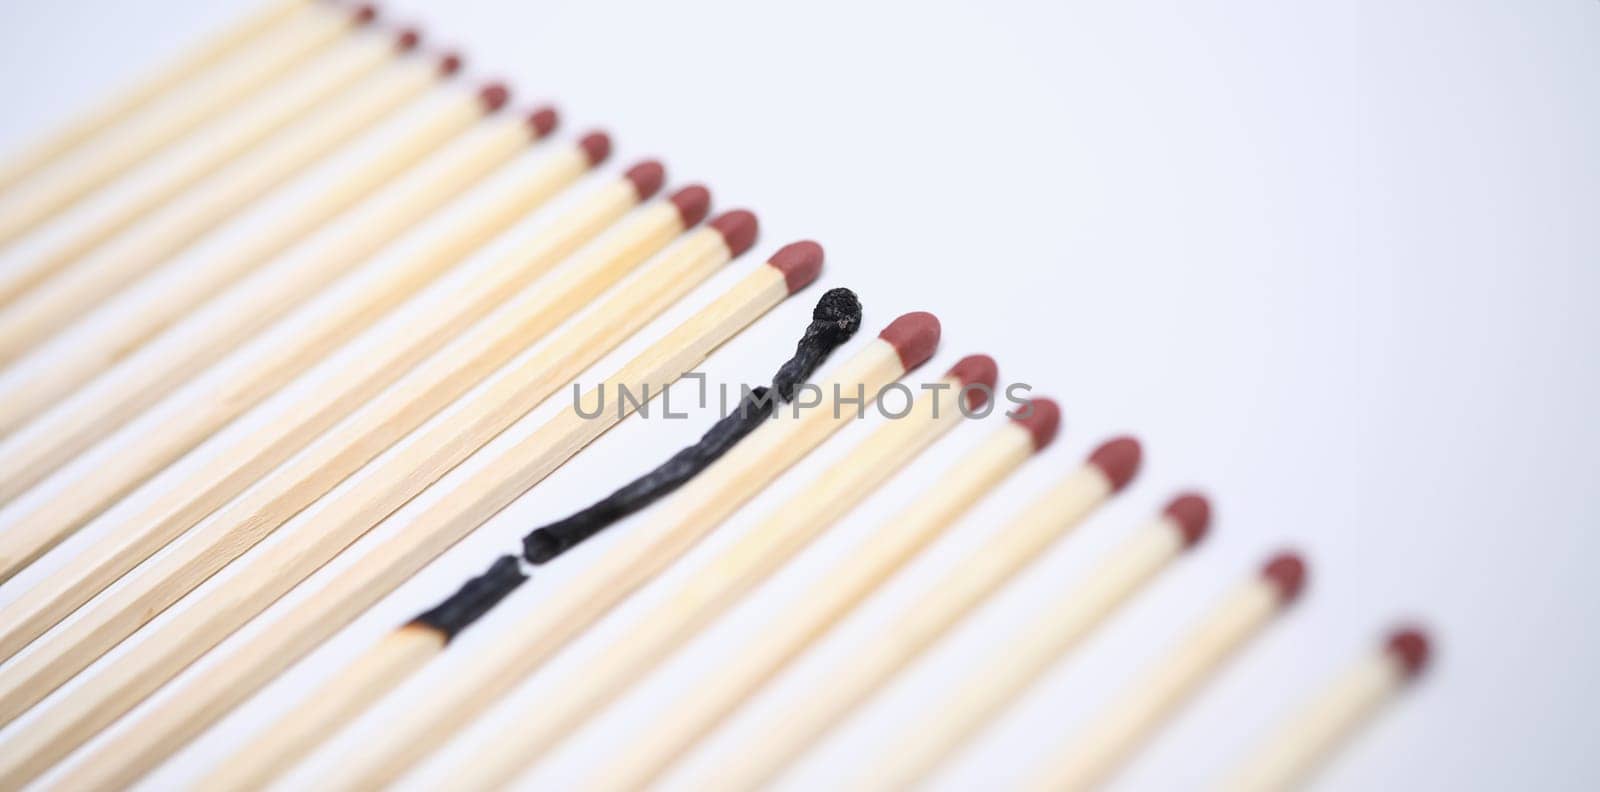 Close-up view of one wooden burnt match among many new whole. Conceptual image of non-renewable energy. Burn out syndrome and stress concept. Isolated on white background